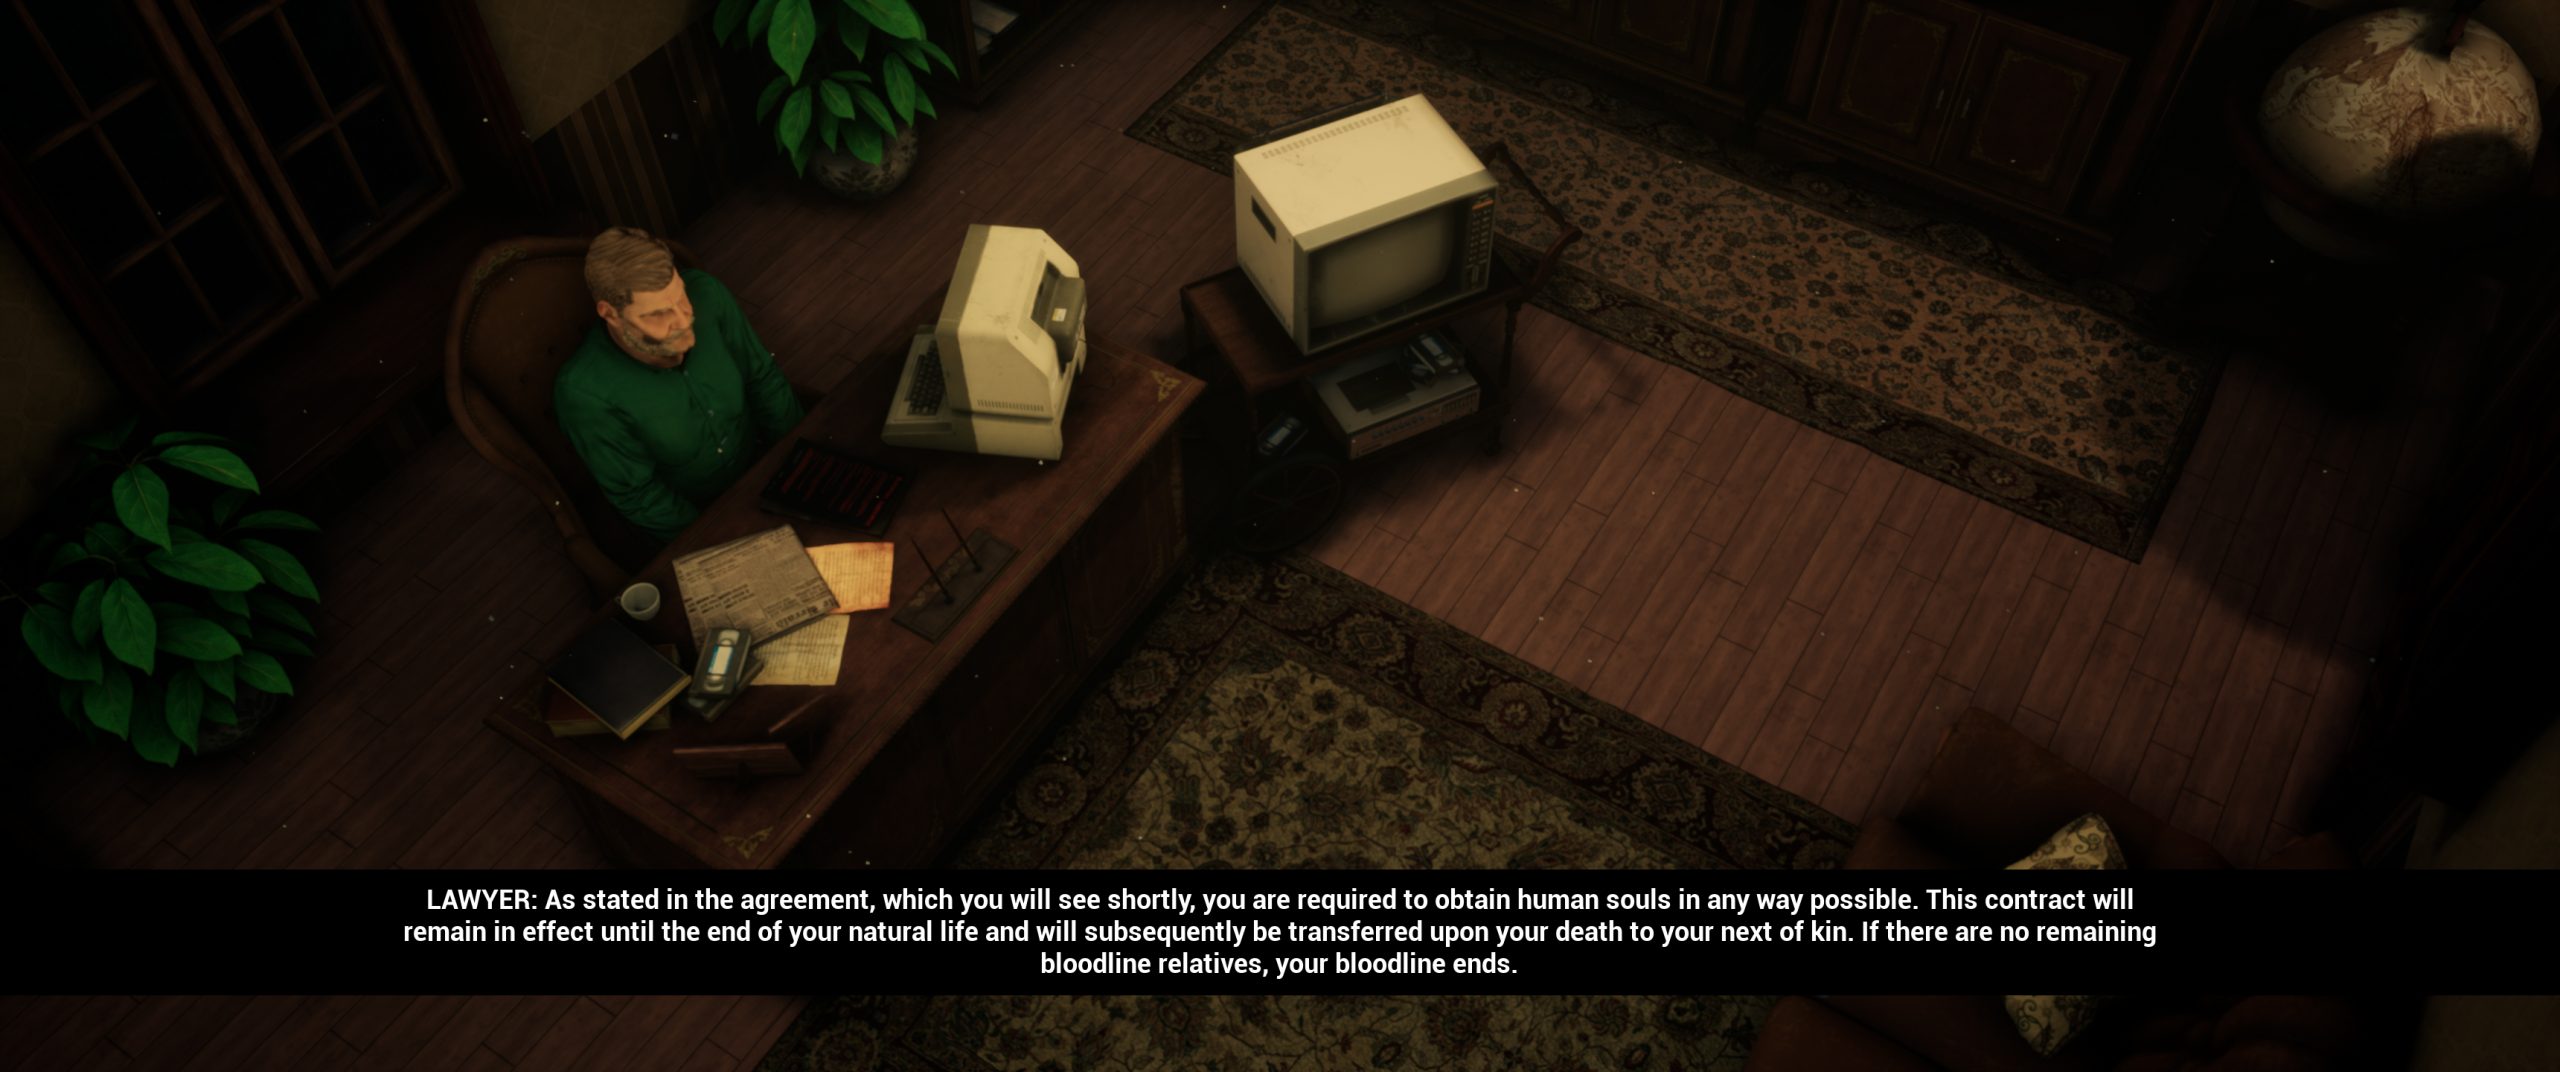 A screenshot from Horror Tycoon. It's of a man at a desk, talking about collecting souls or the family bloodline will end.